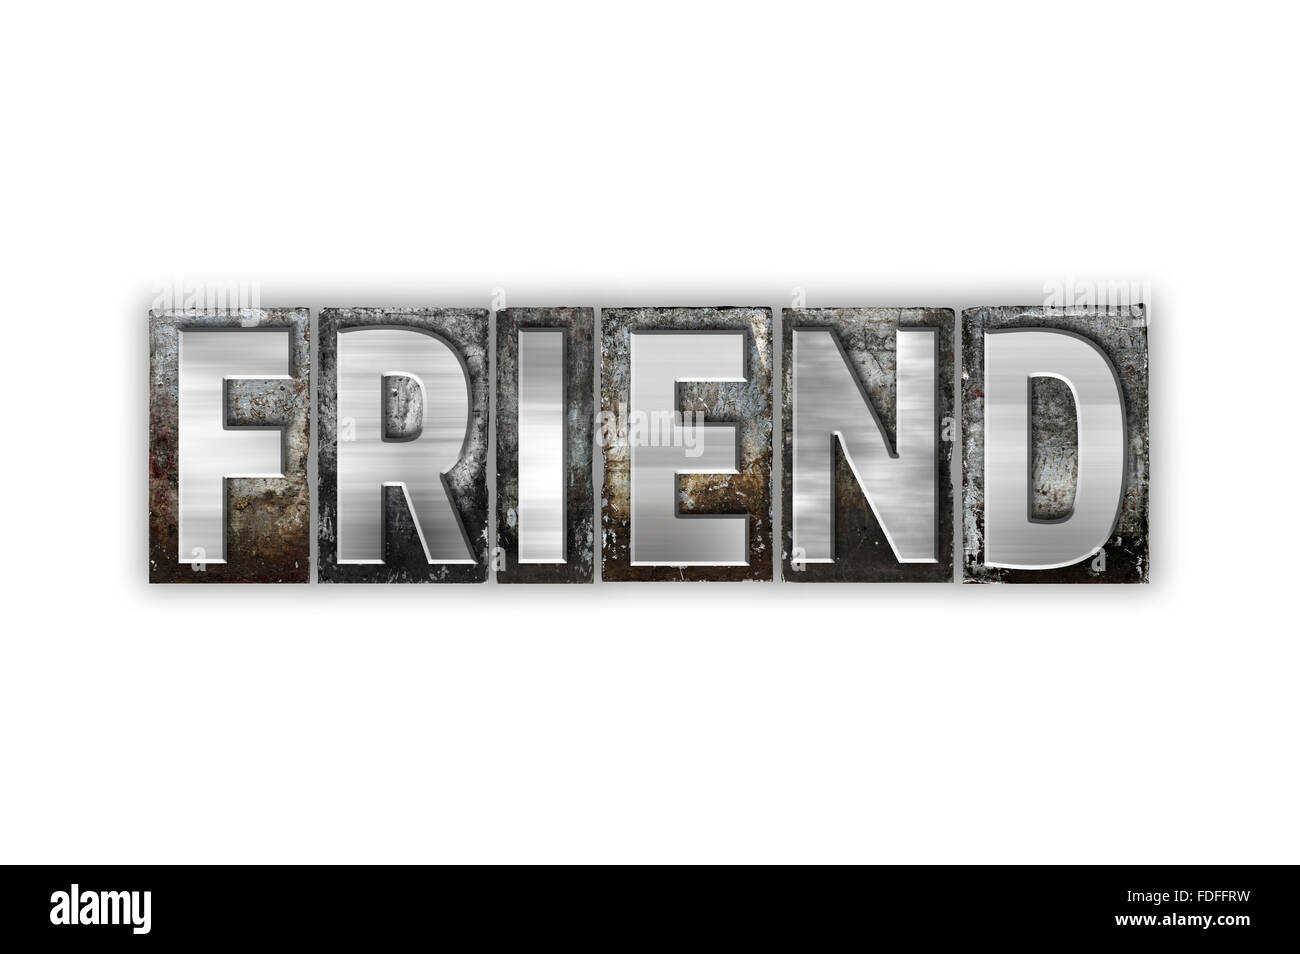 The word 'Friend' written in vintage metal letterpress type isolated on a white background. Stock Photo